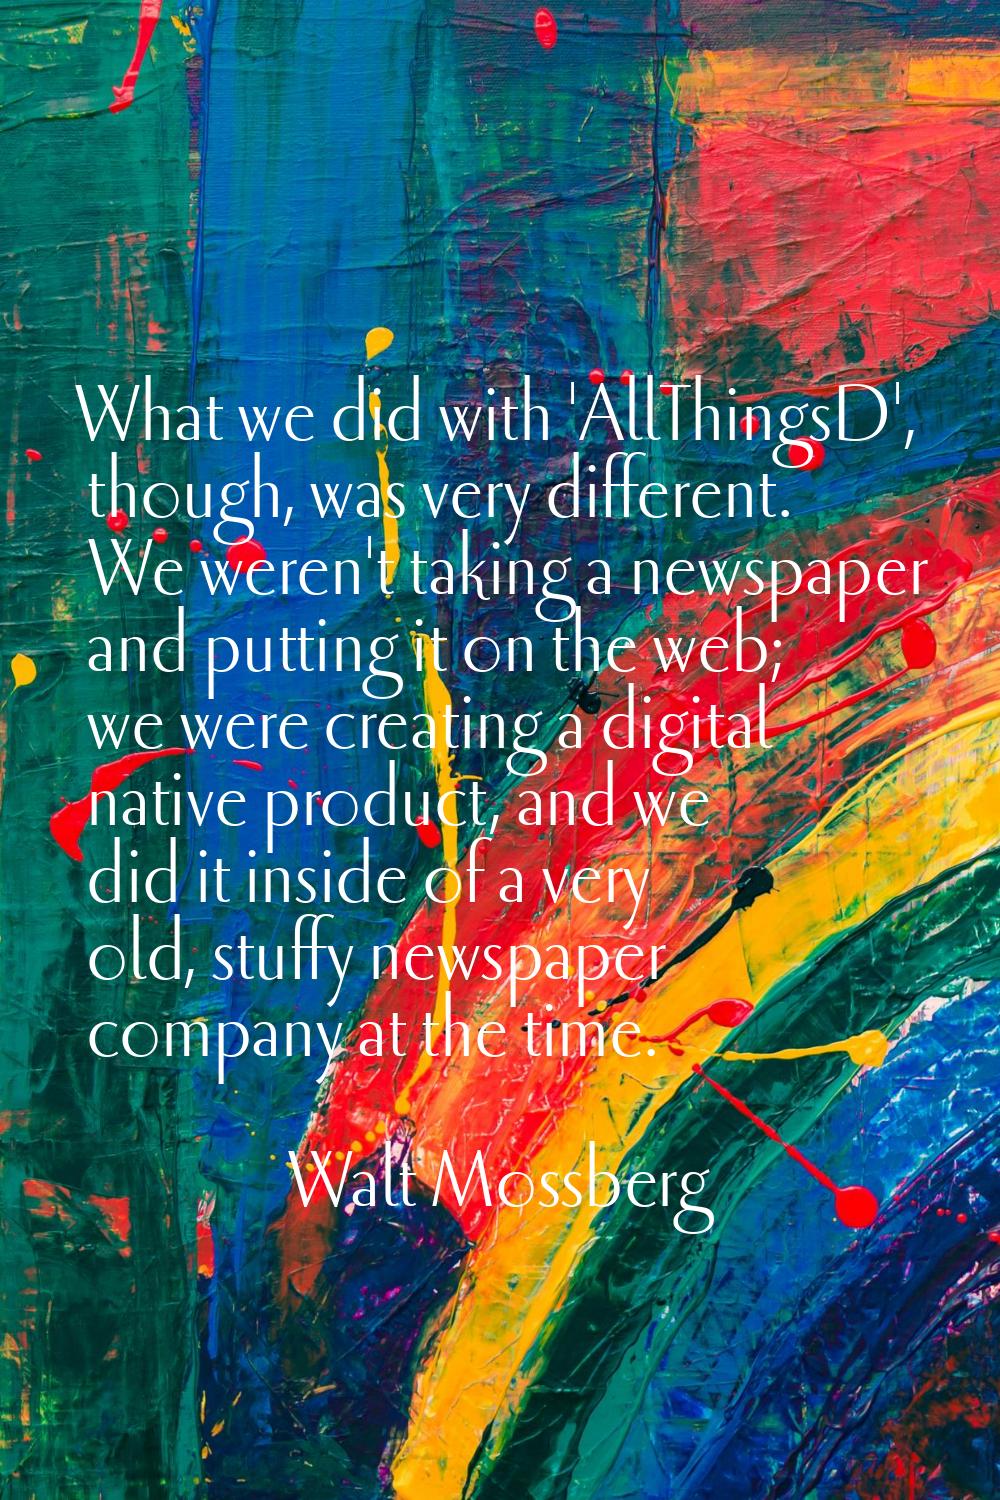 What we did with 'AllThingsD', though, was very different. We weren't taking a newspaper and puttin